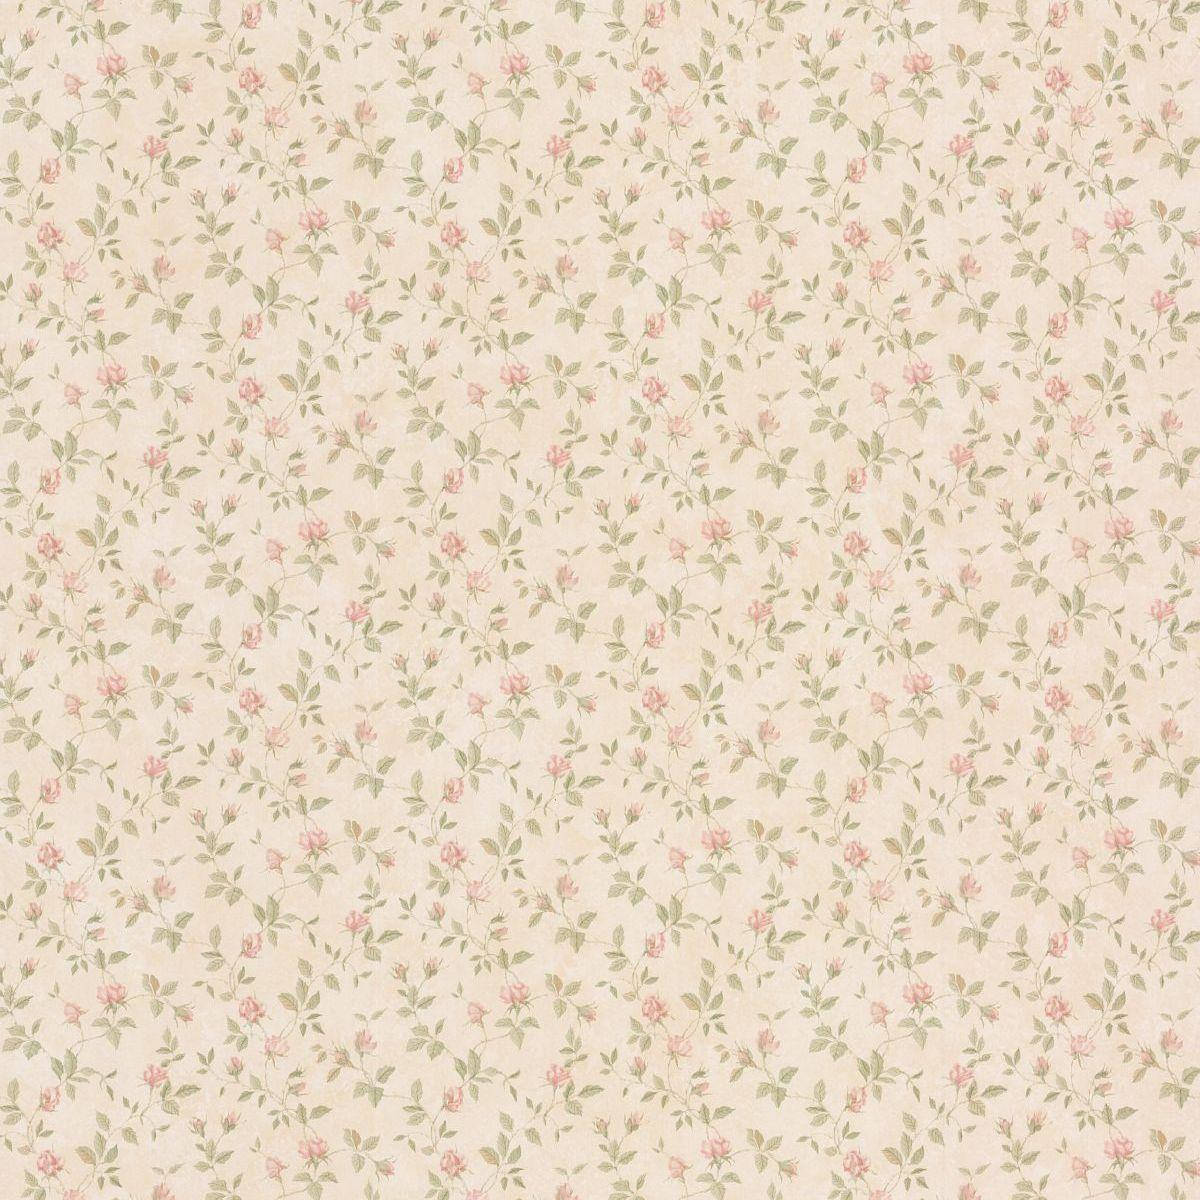 Dollhouse Vintage Rose Wall Covering Wallpaper